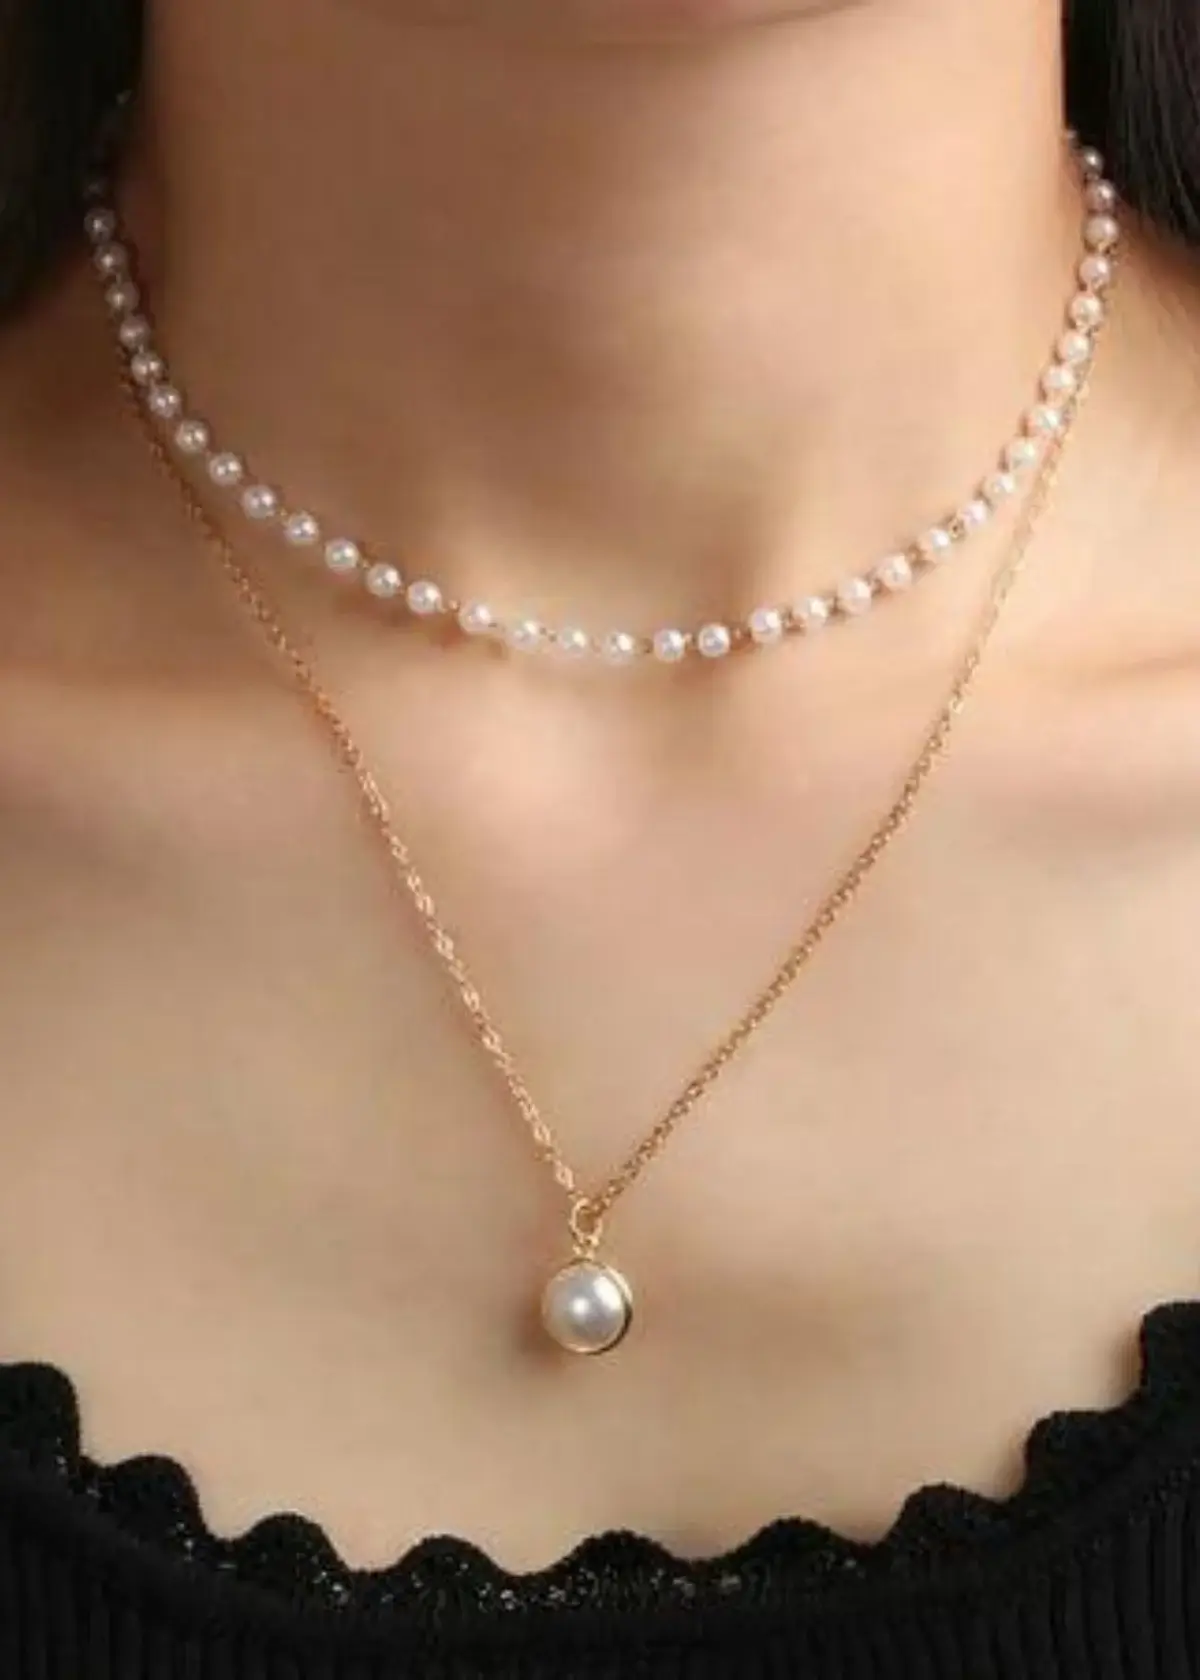 How to Choose the Right Tiny Pearl Necklace?